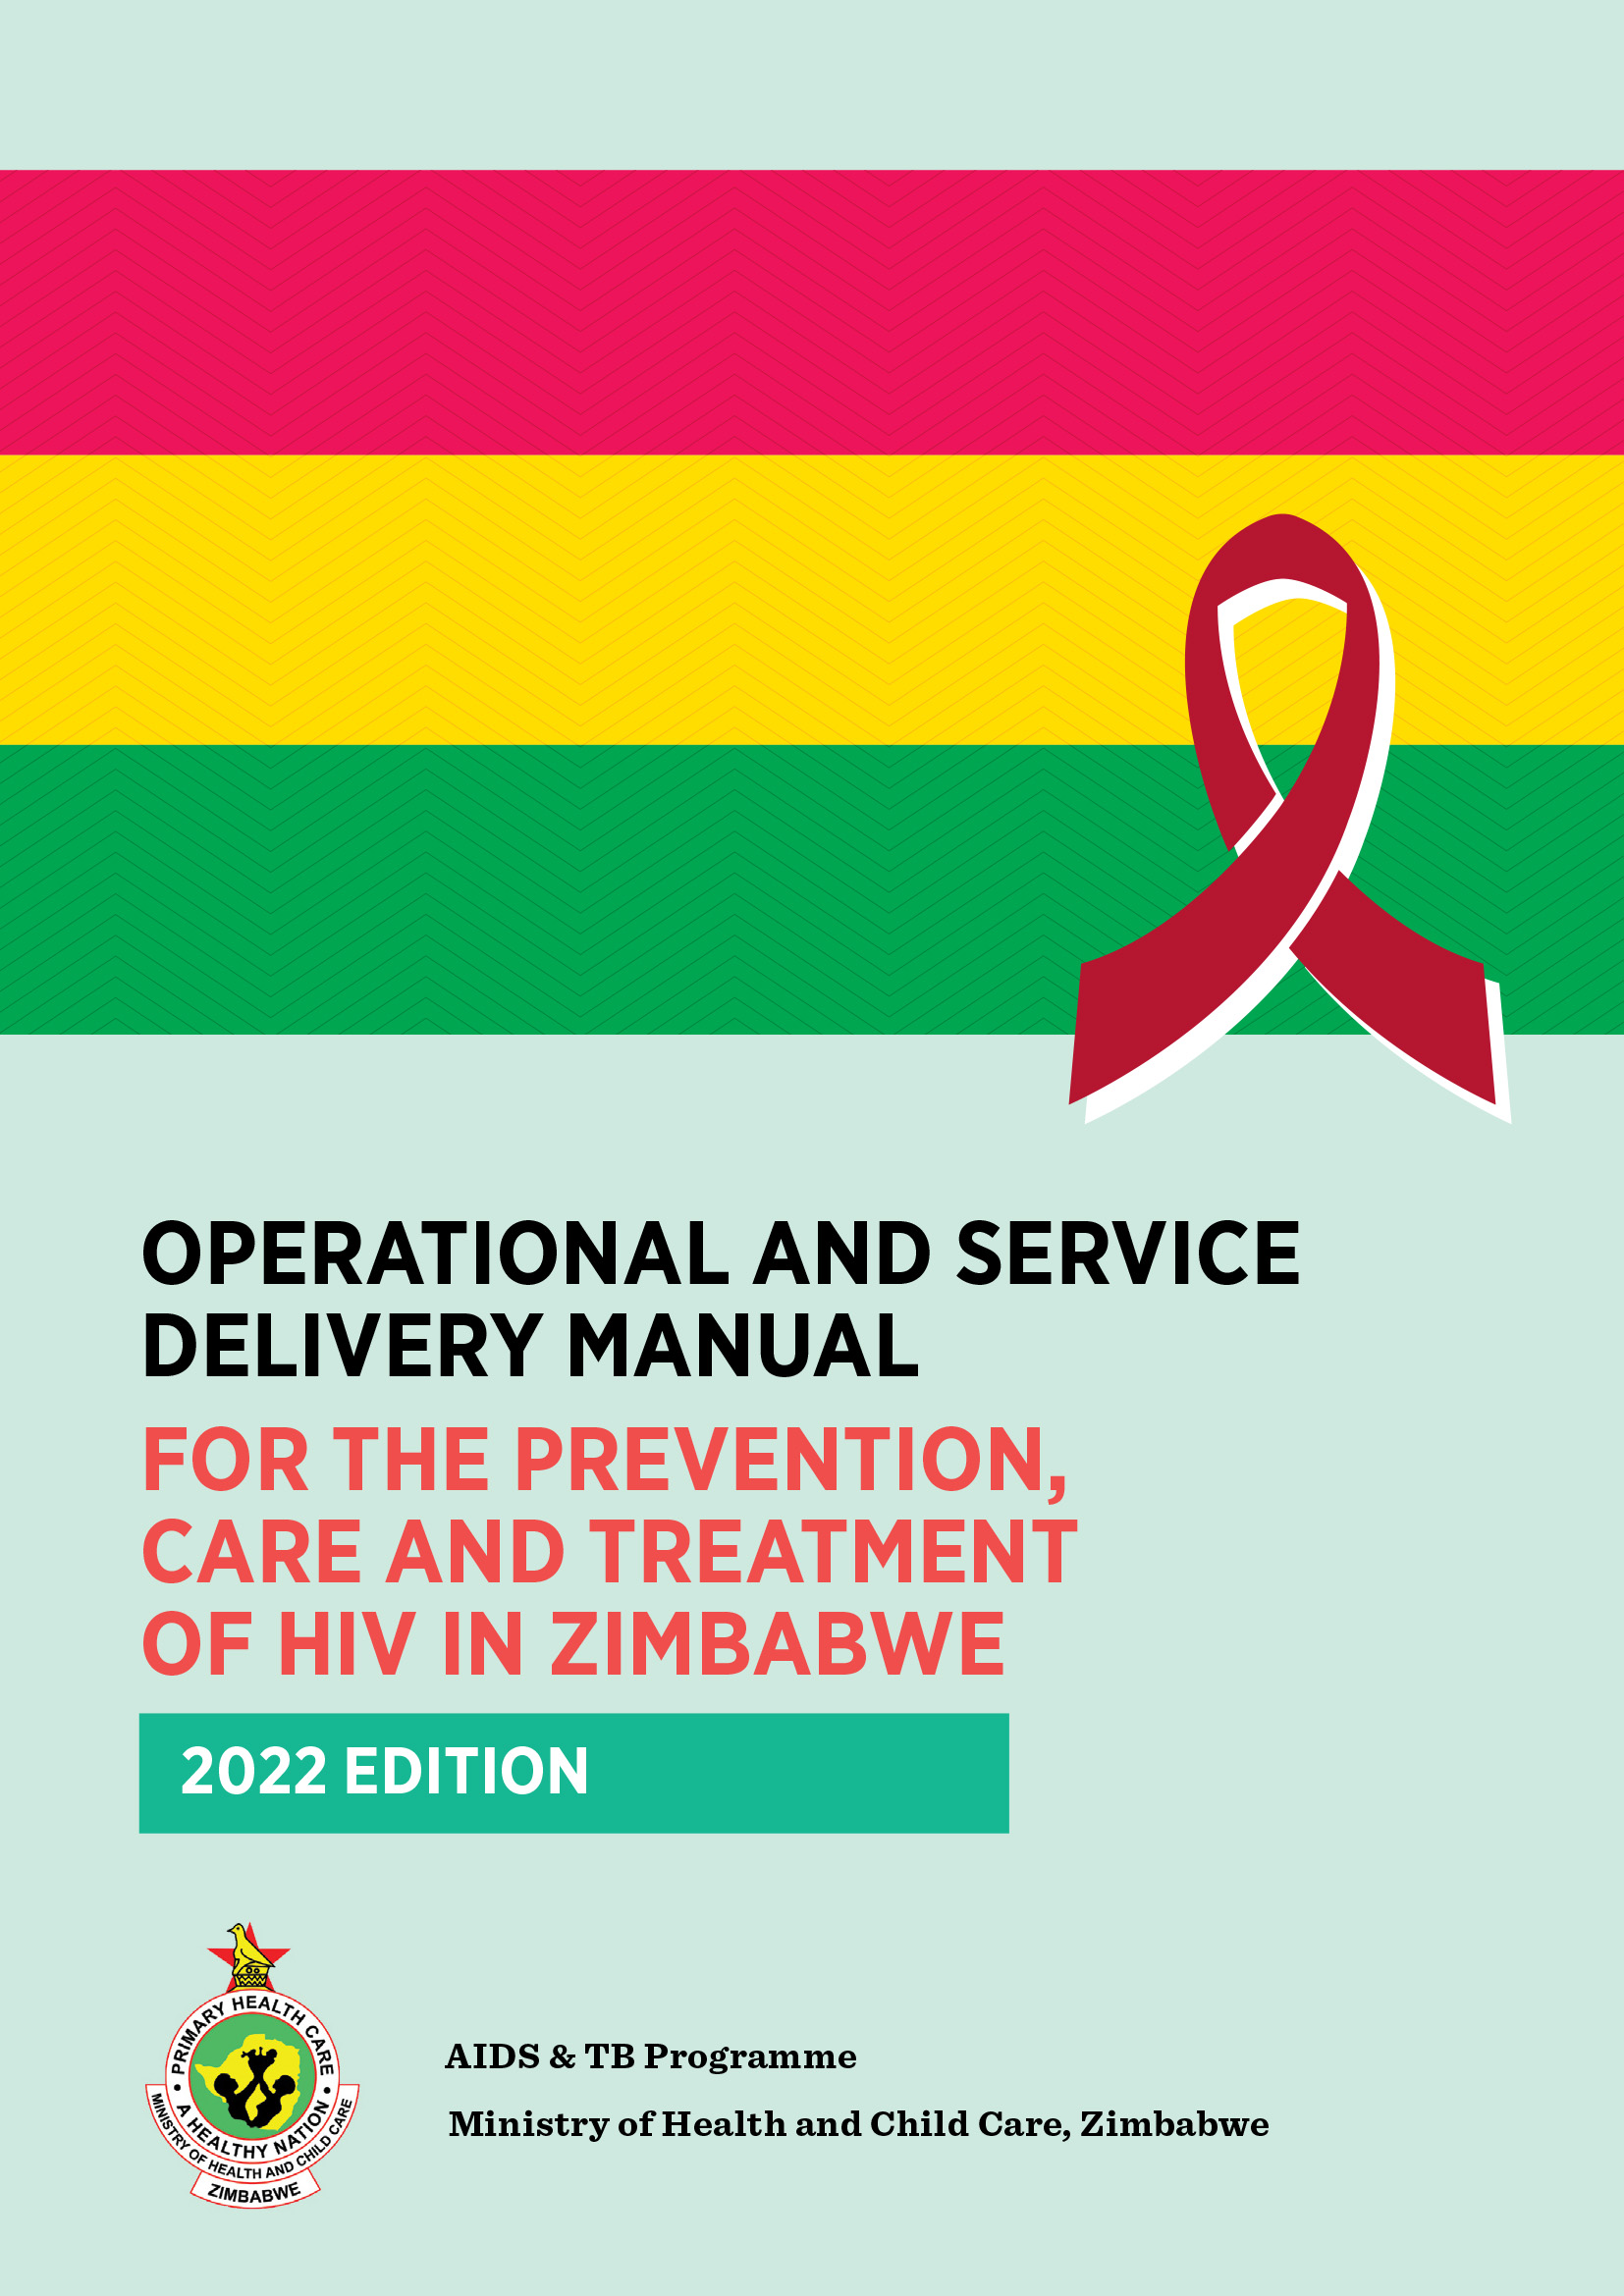 Operational and service delivery manual for the prevention, care and treatment of HIV in Zimbabwe